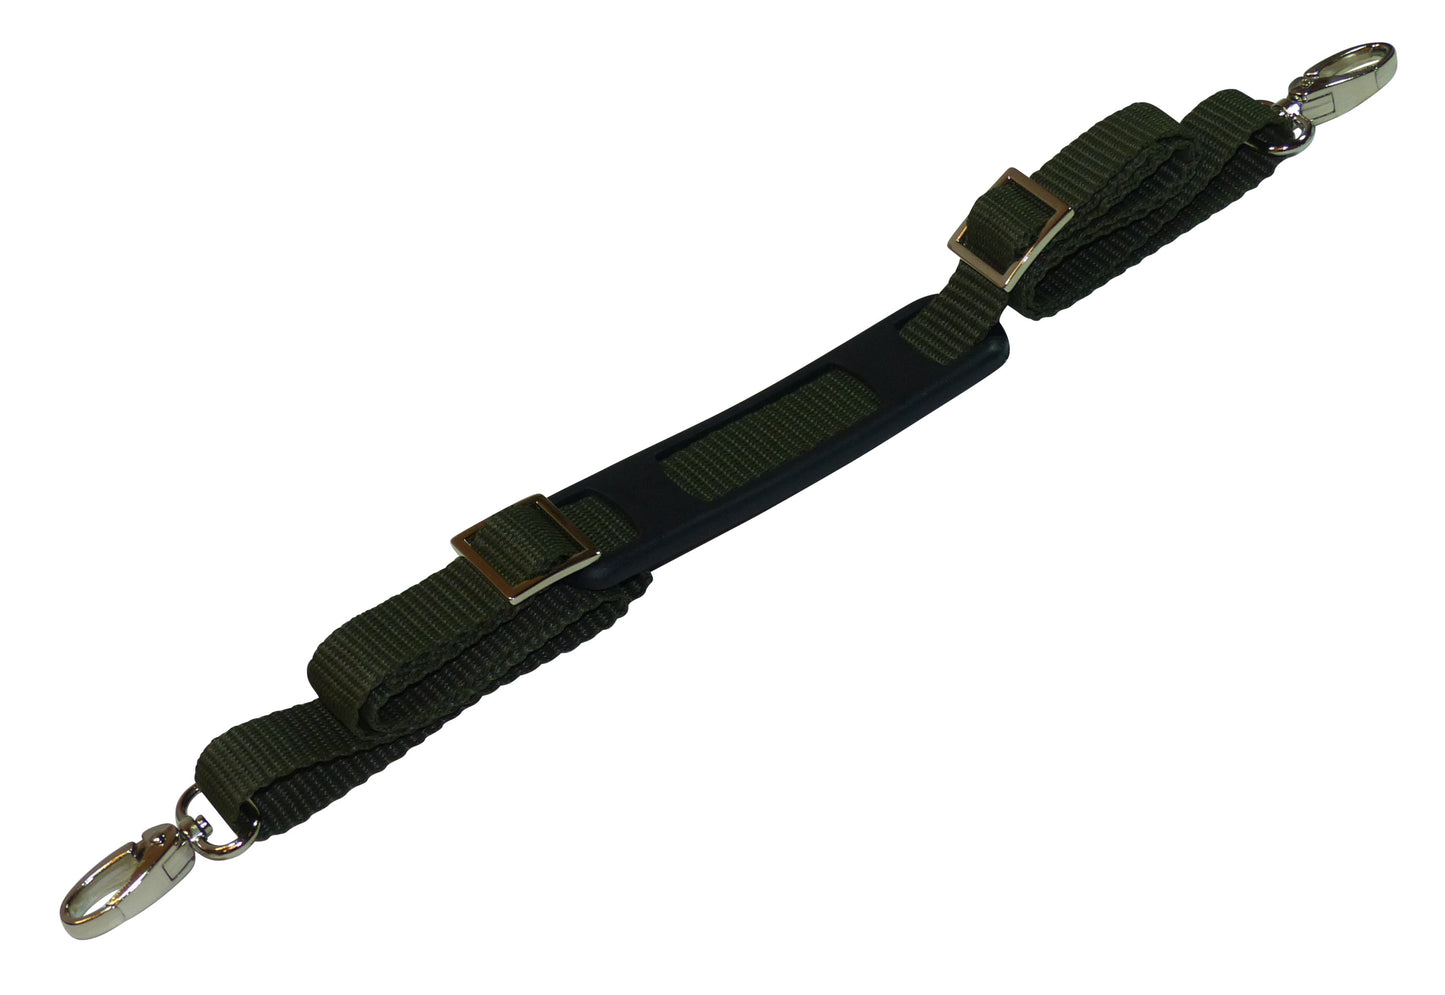 Benristraps 20mm Bag Strap with Metal Buckles and Shoulder Pad, 1 Metre in olive green